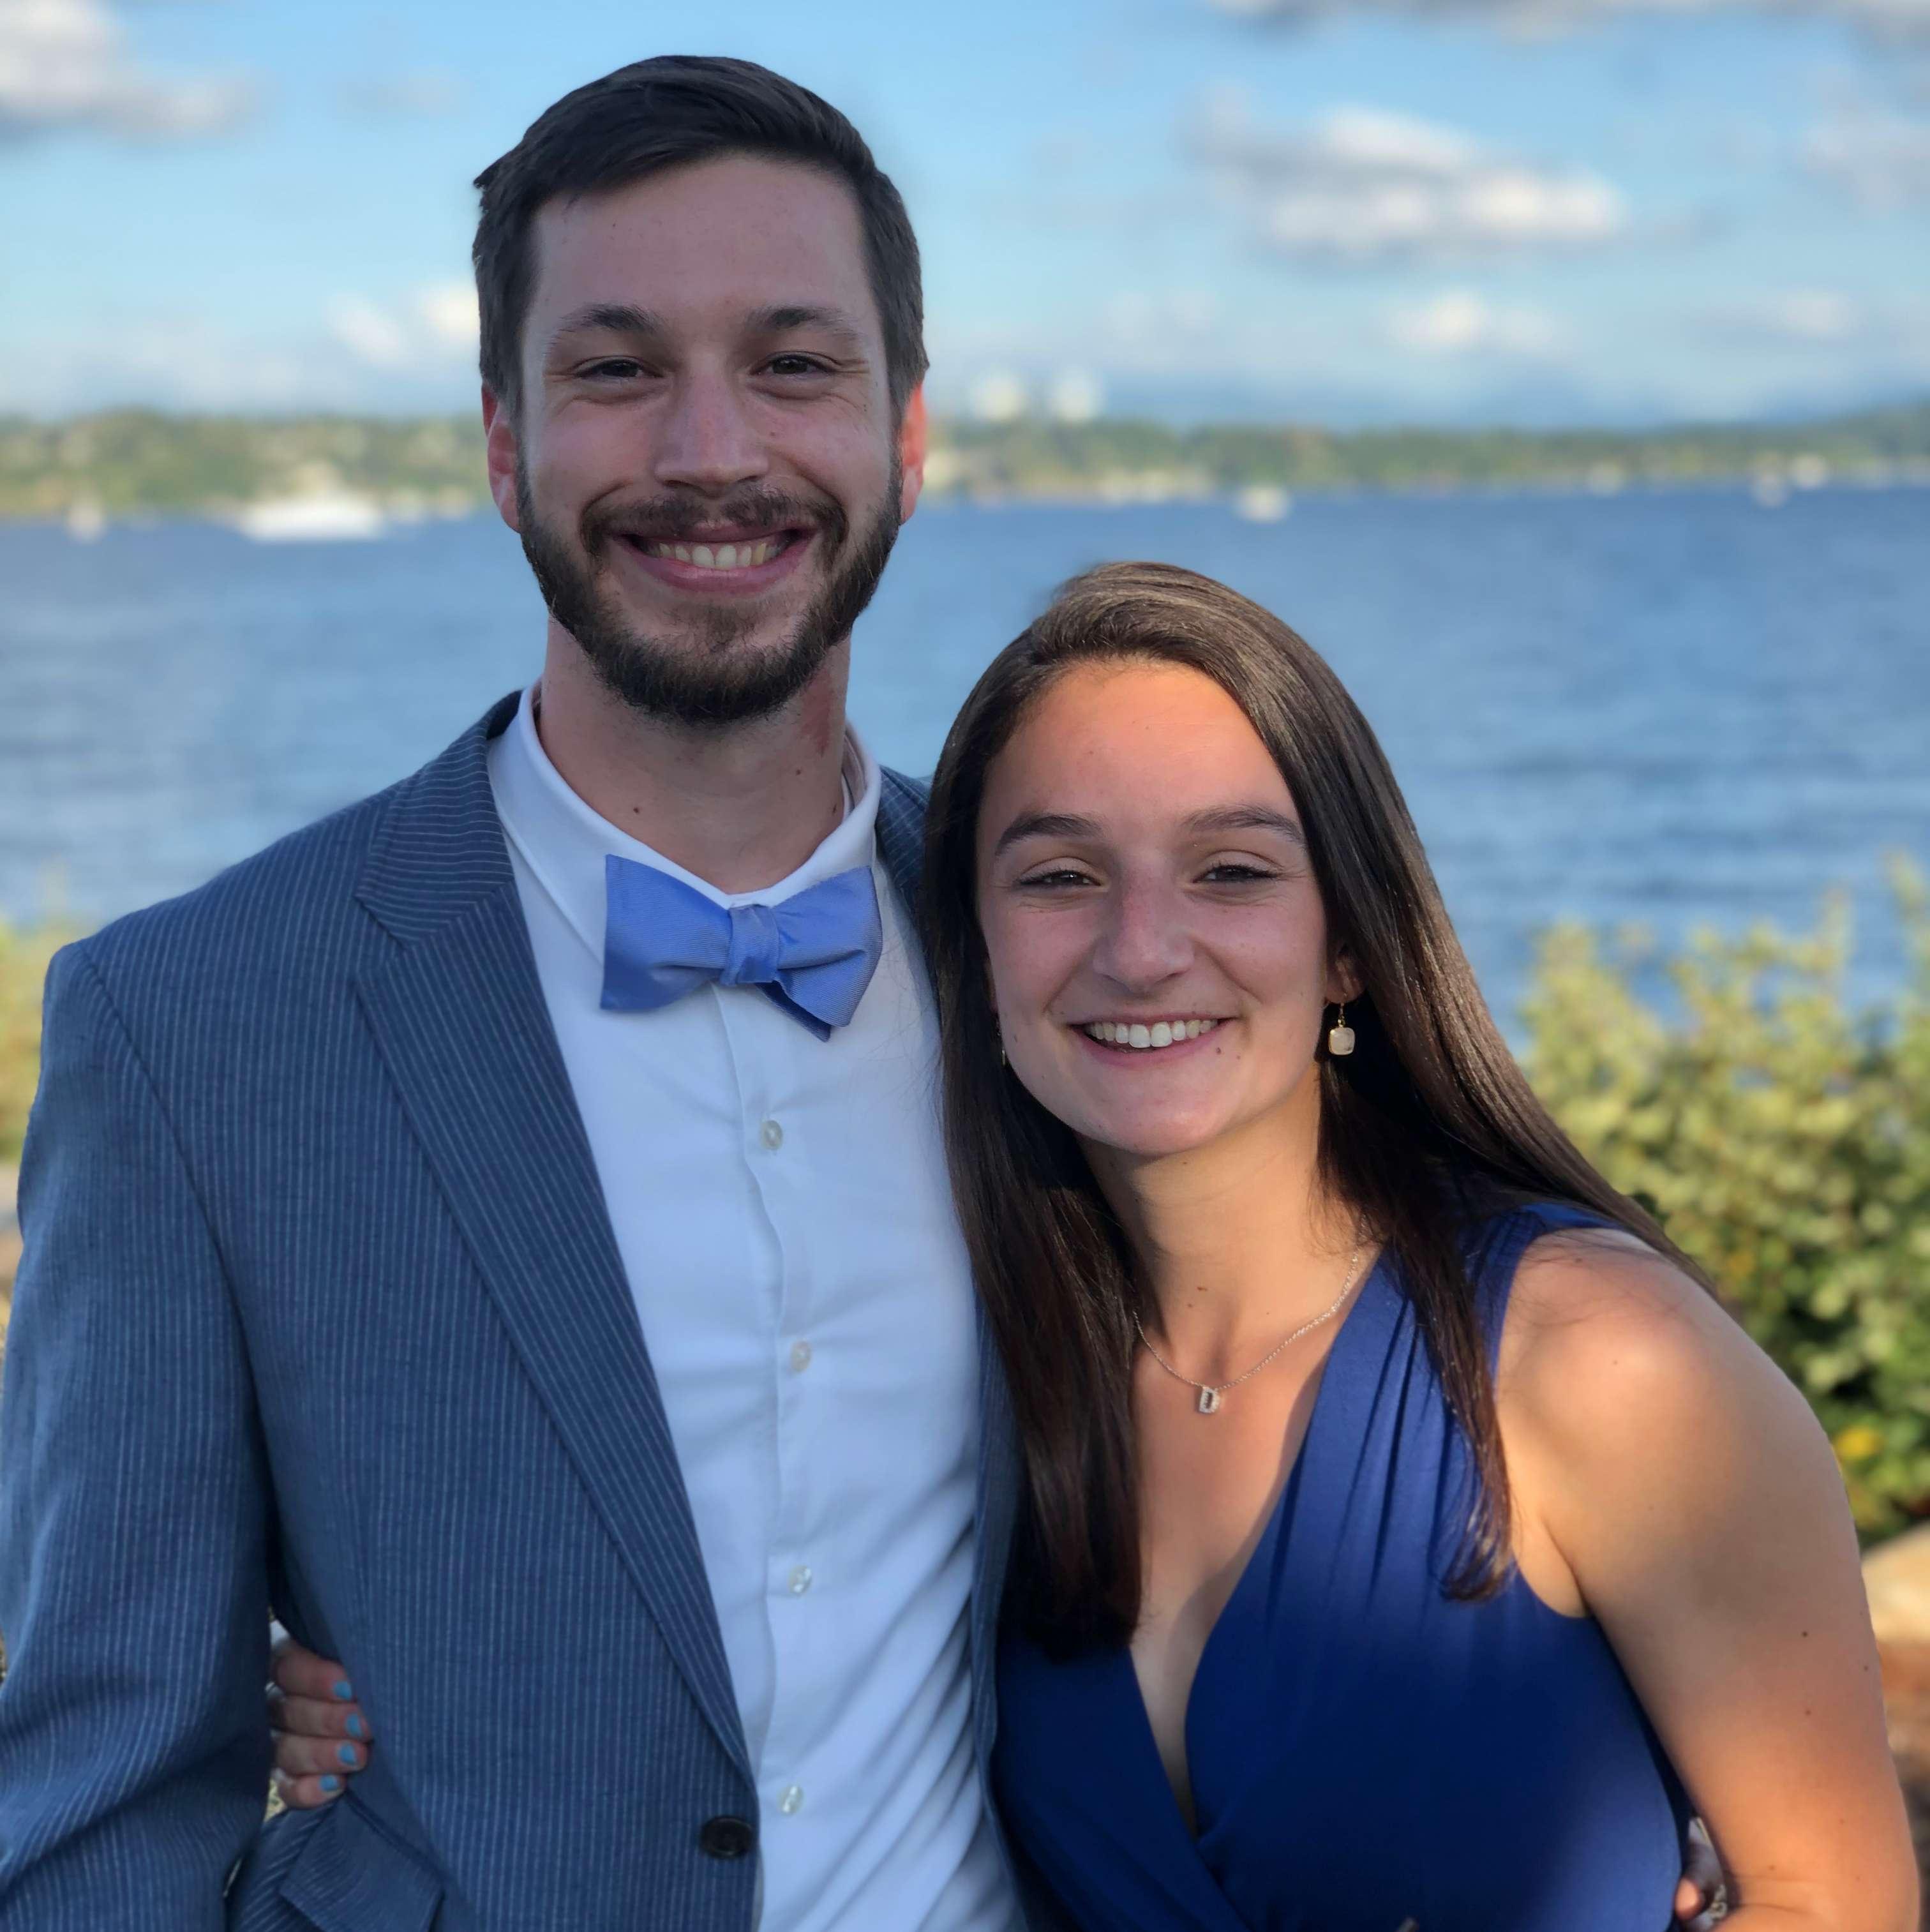 September 2019 -
At our friend's Timur and Michelle's wedding in Seattle. We then "crashed" their mini honeymoon and traveled around the PNW together.